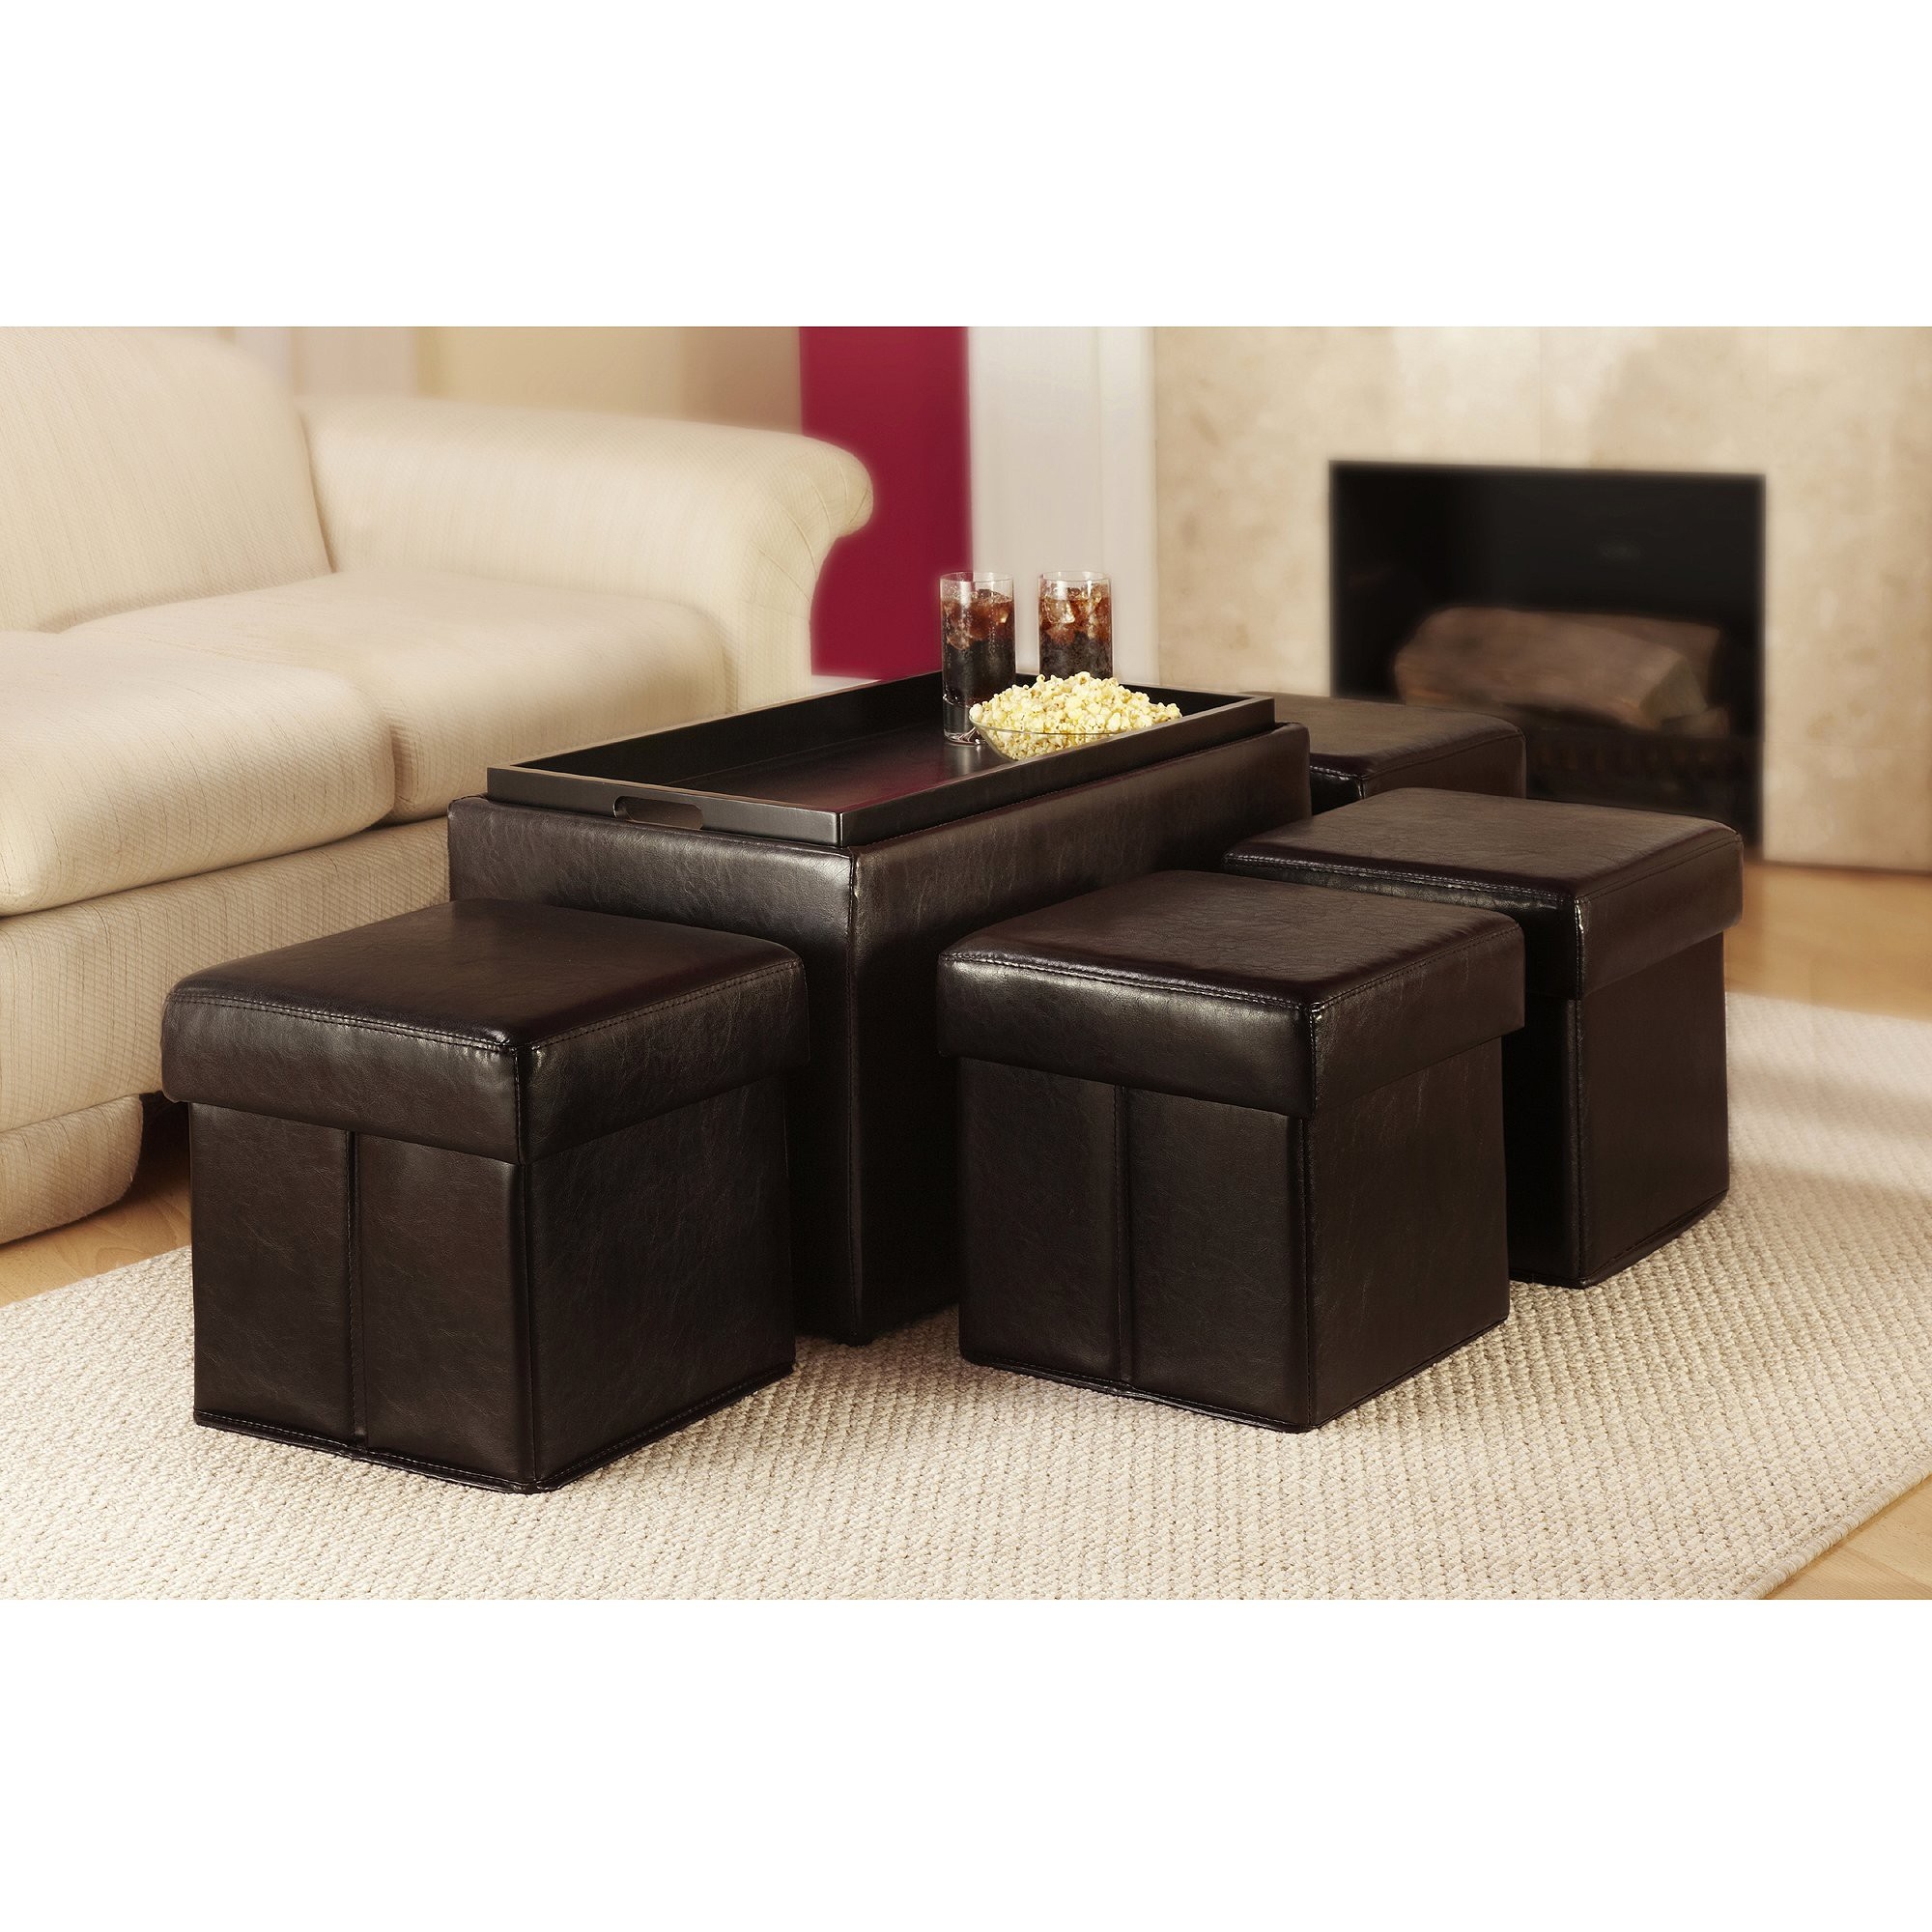 Coffee table with four ottomans